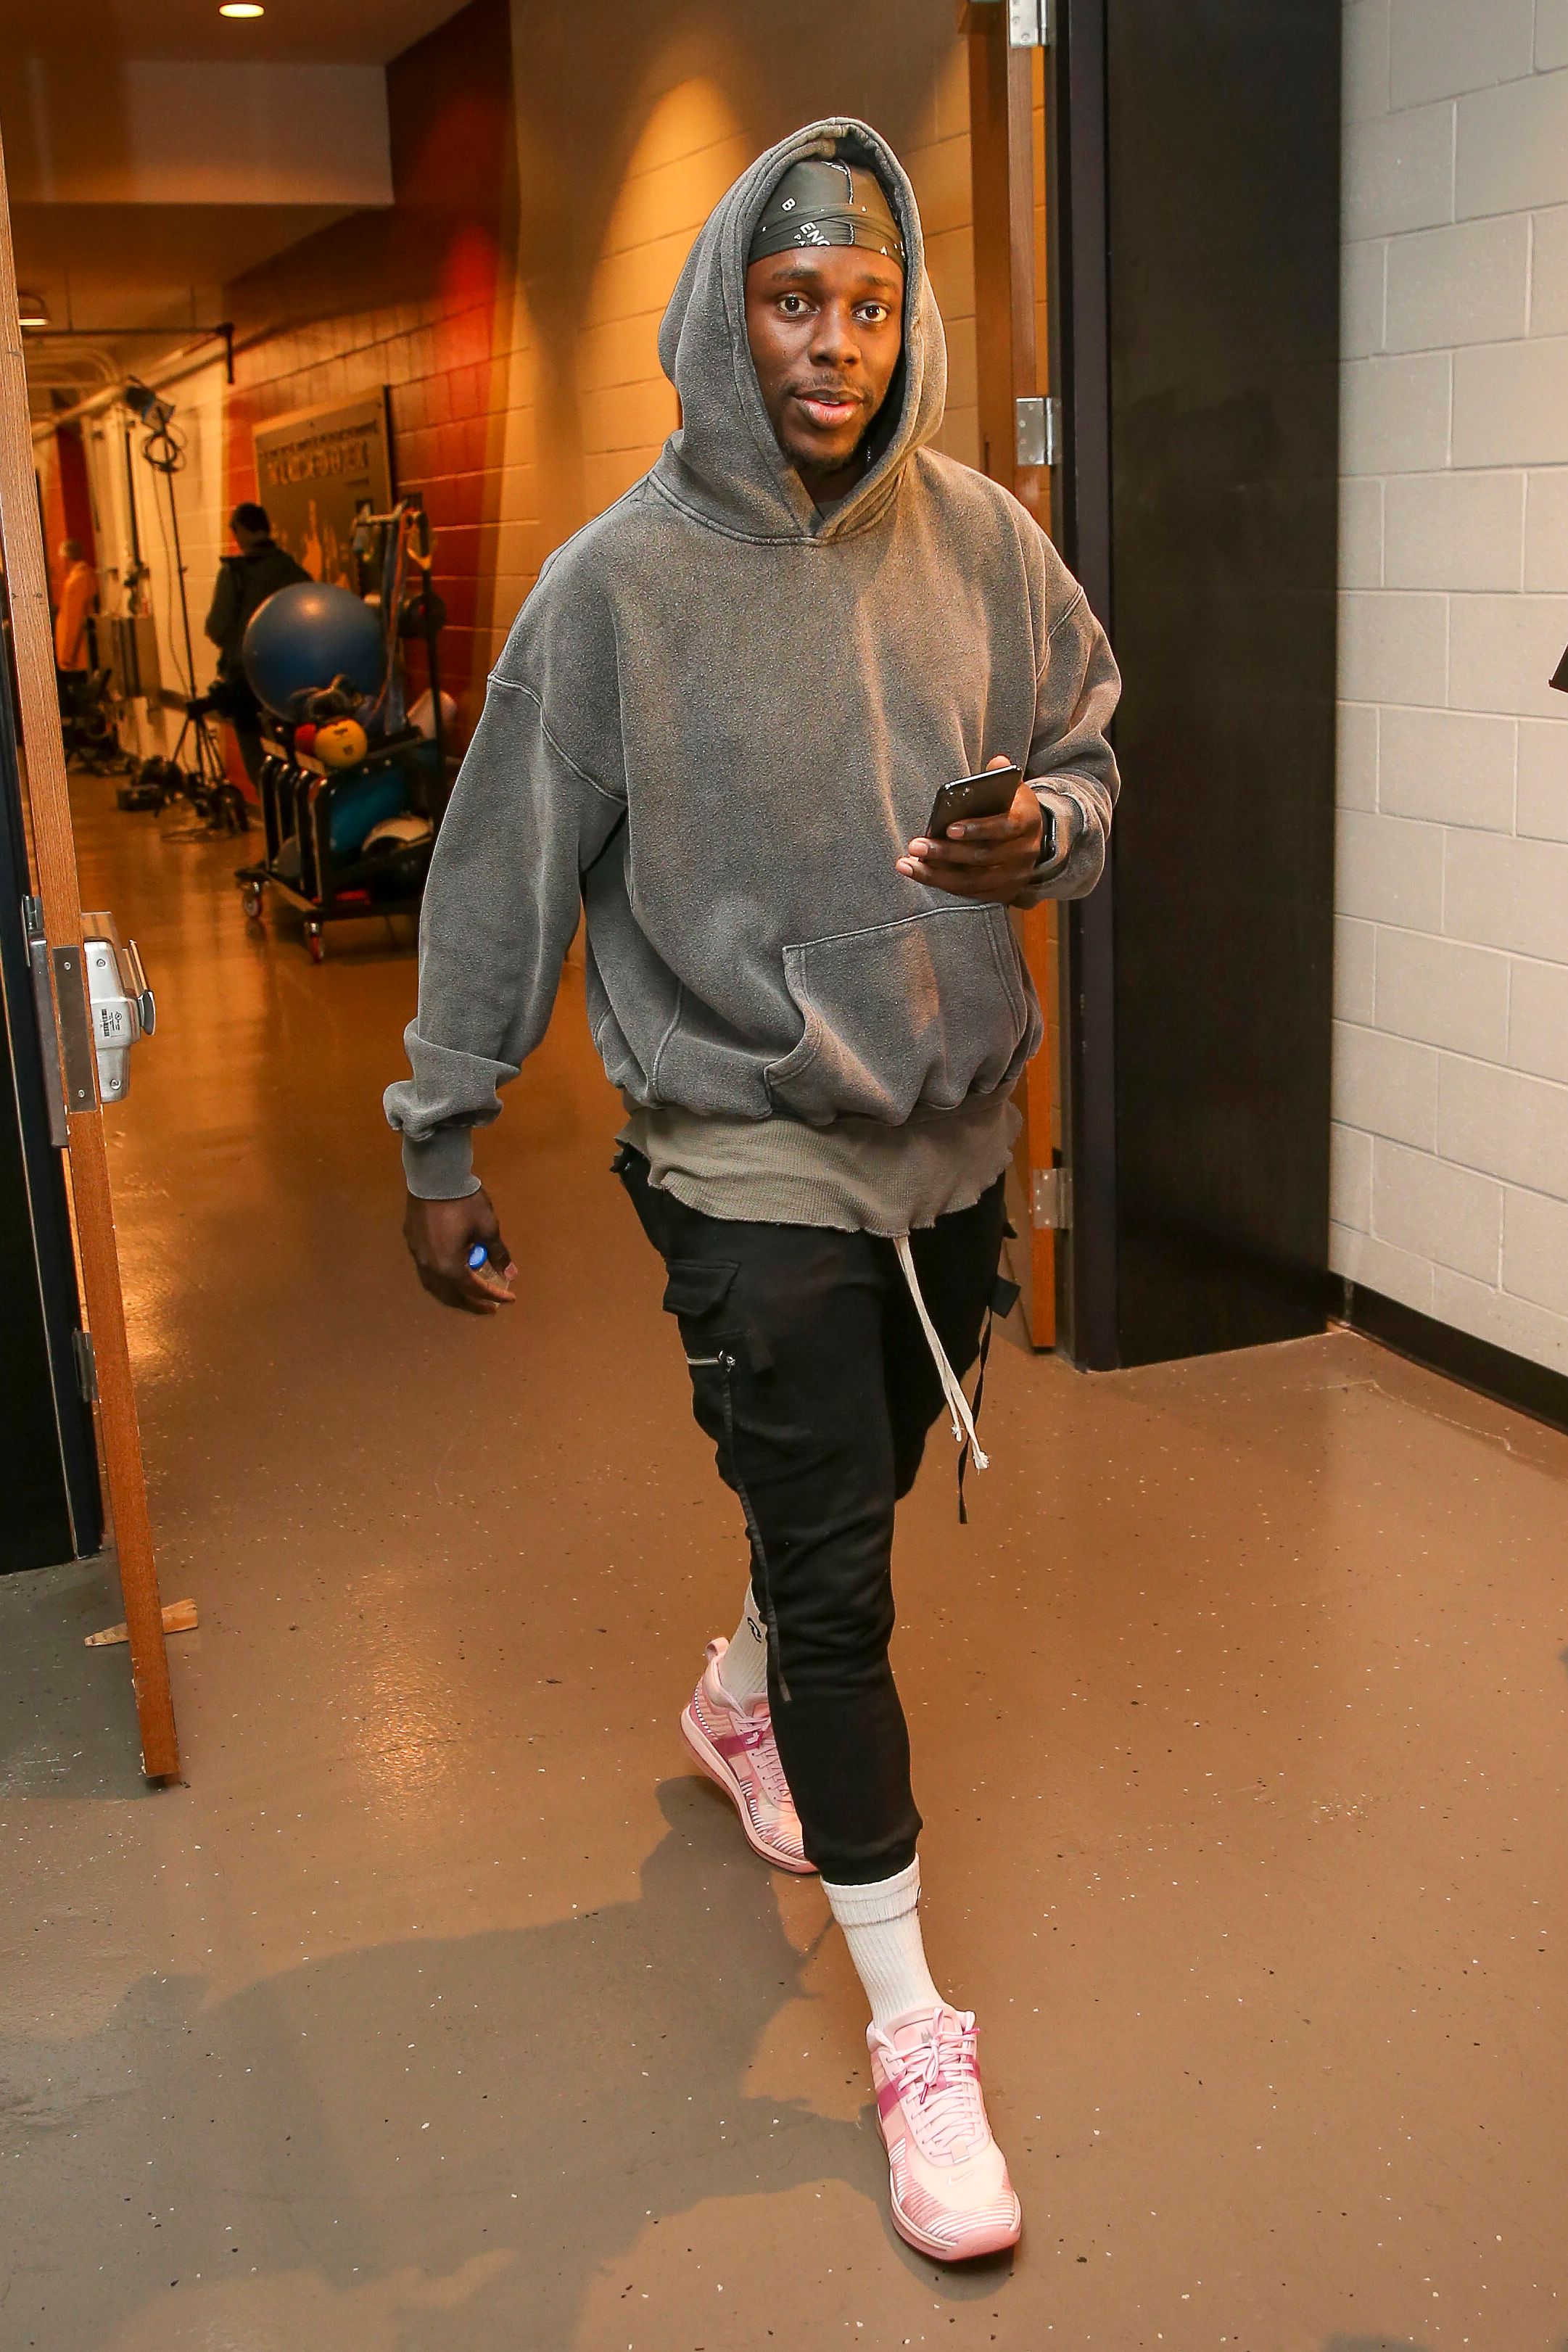 Jrue Holiday, #11 of the New Orleans Pelicans, arrives to the game against the Memphis Grizzlies on January 31, 2020 at the Smoothie King Center in New Orleans, Louisiana. | Source: Getty Images